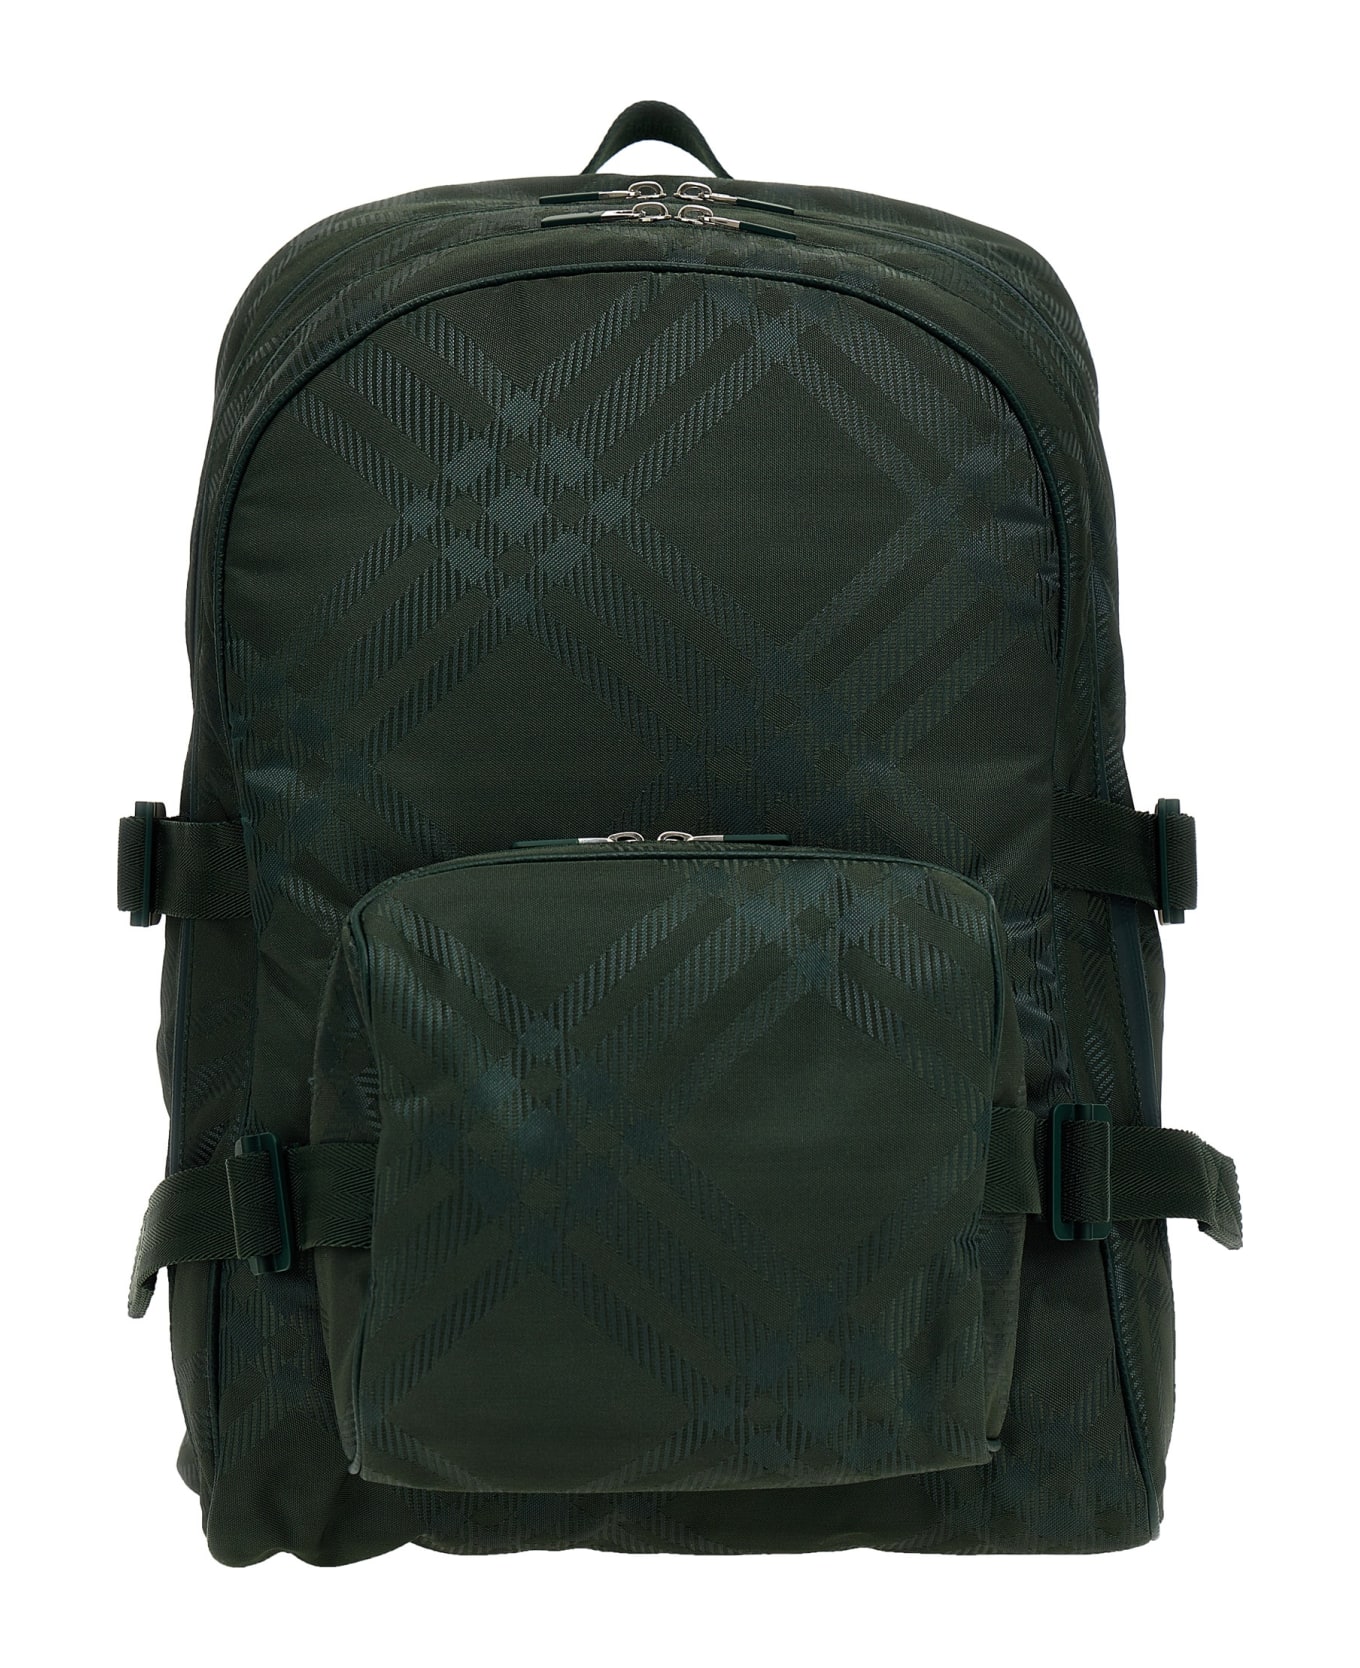 Burberry Check Backpack - Green バックパック